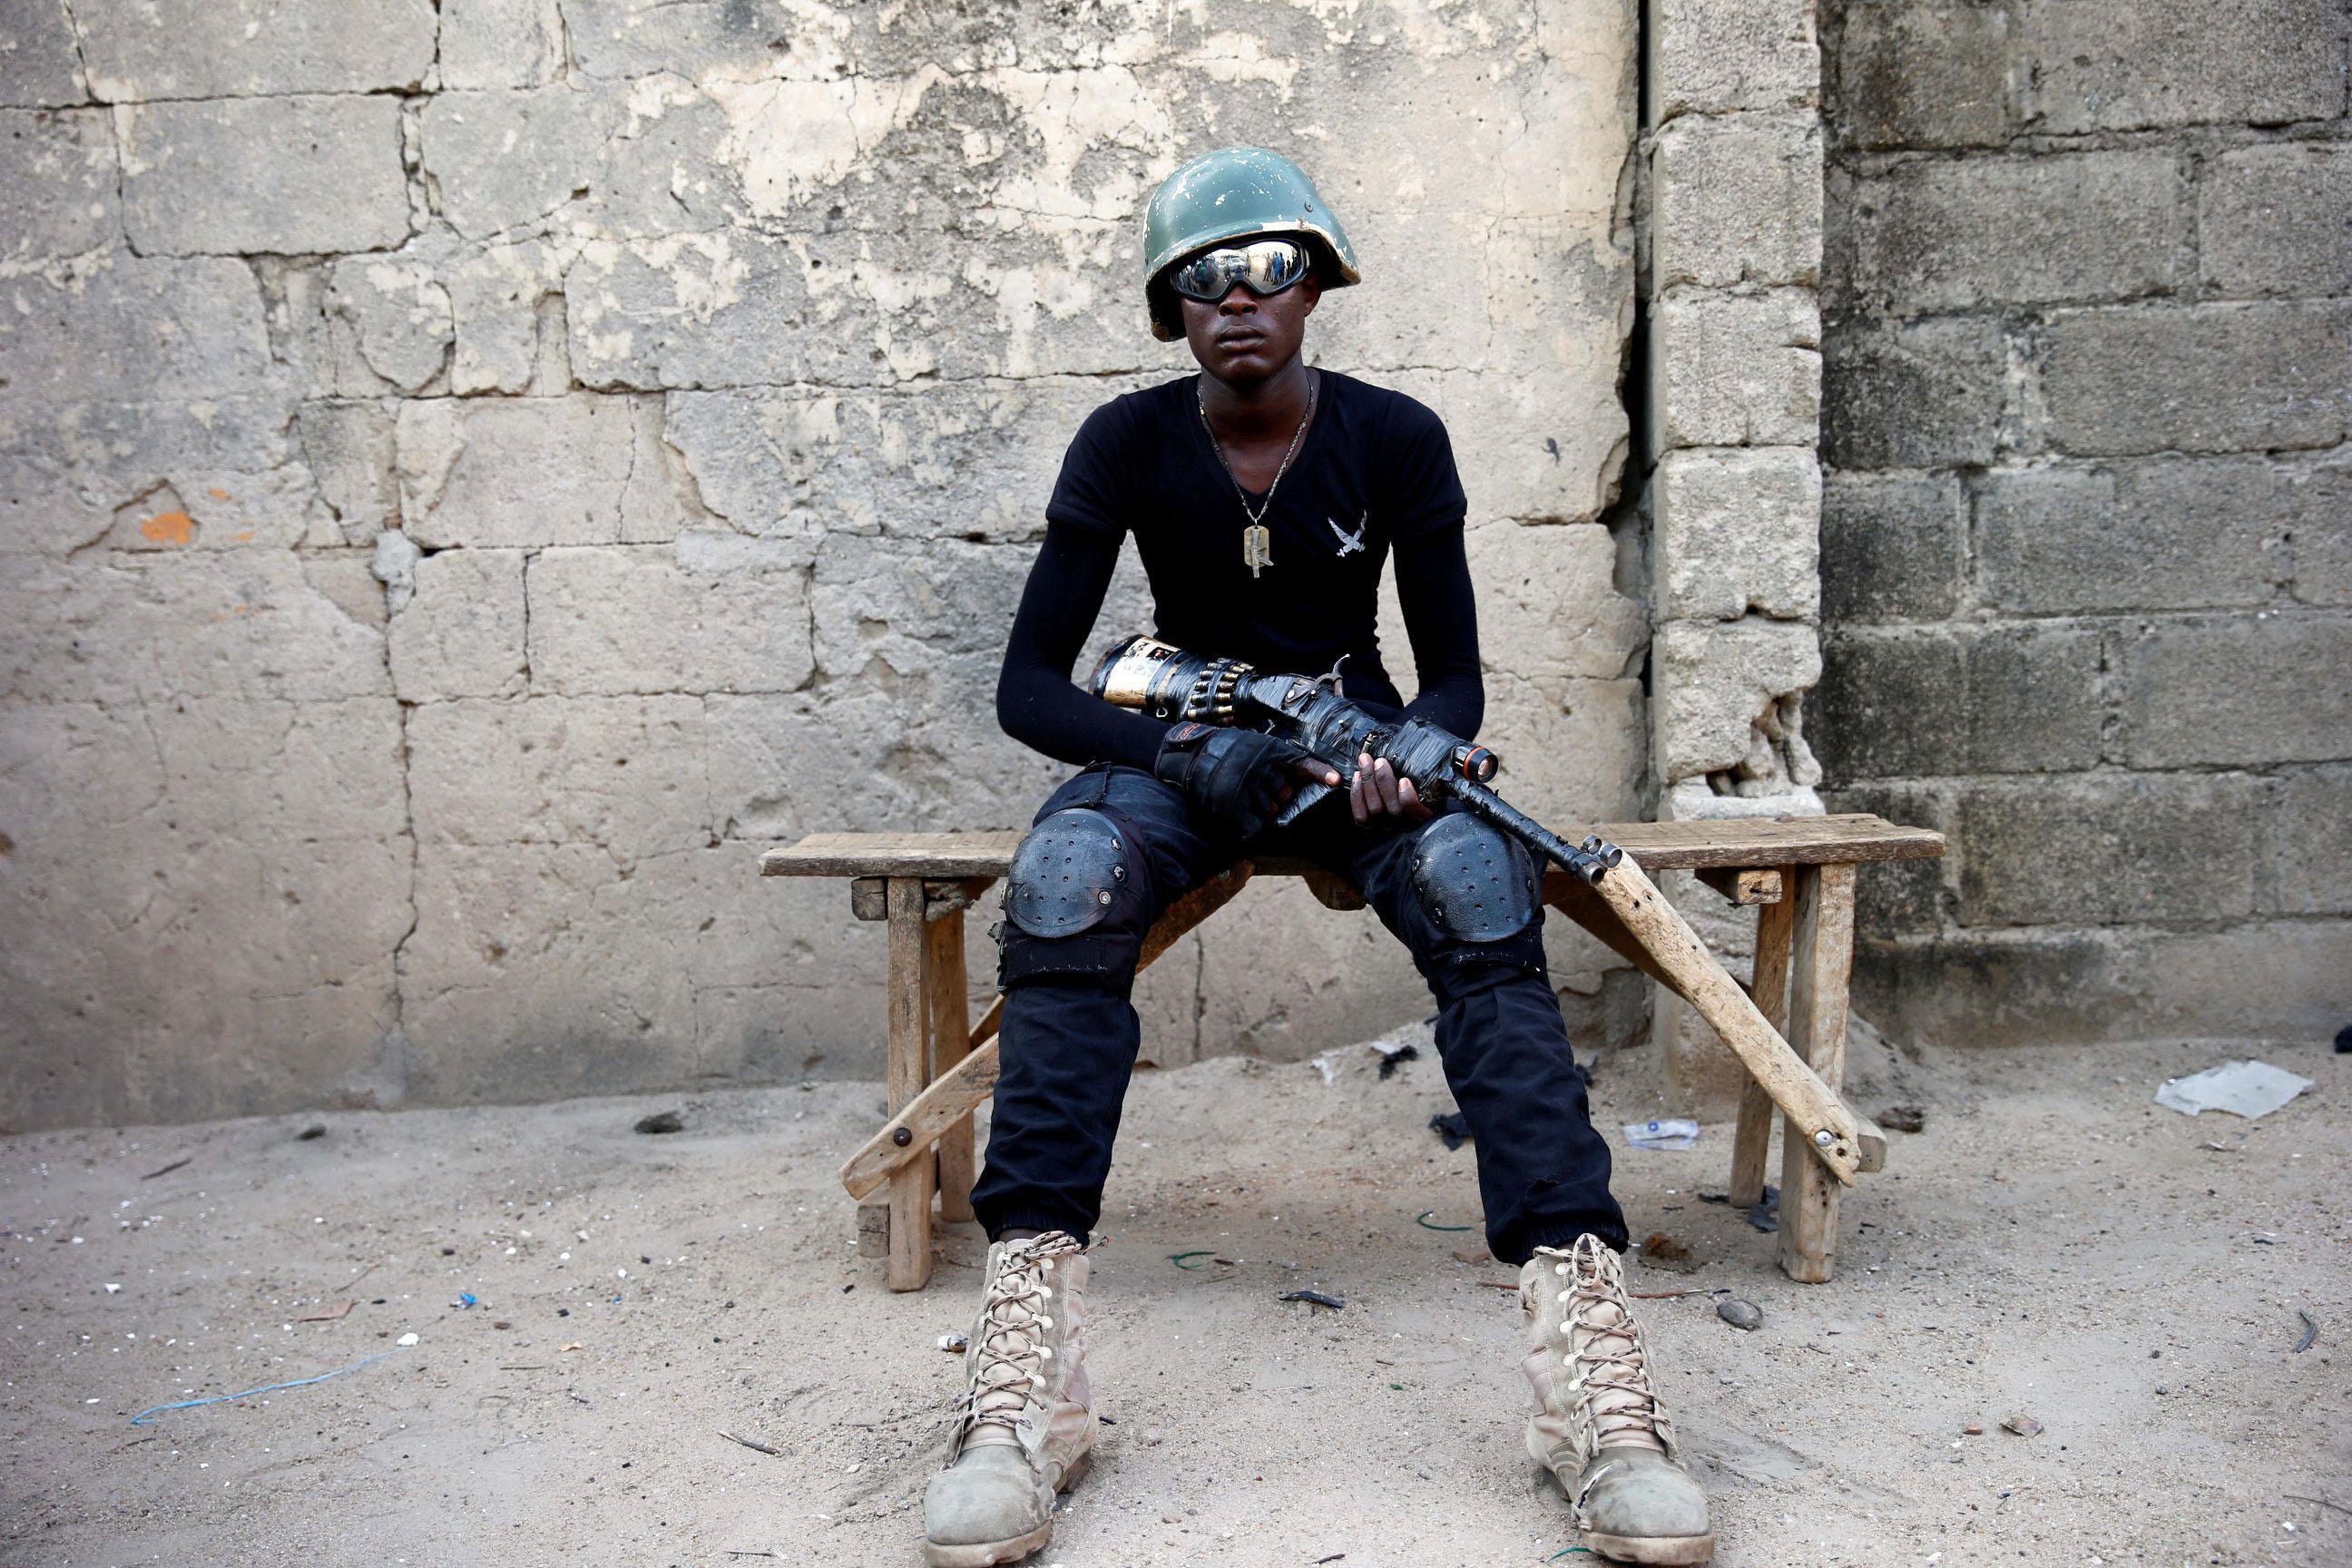 A member of the local militia group, otherwise known as CJTF, Adamu Mohammed, 23, poses for a portra